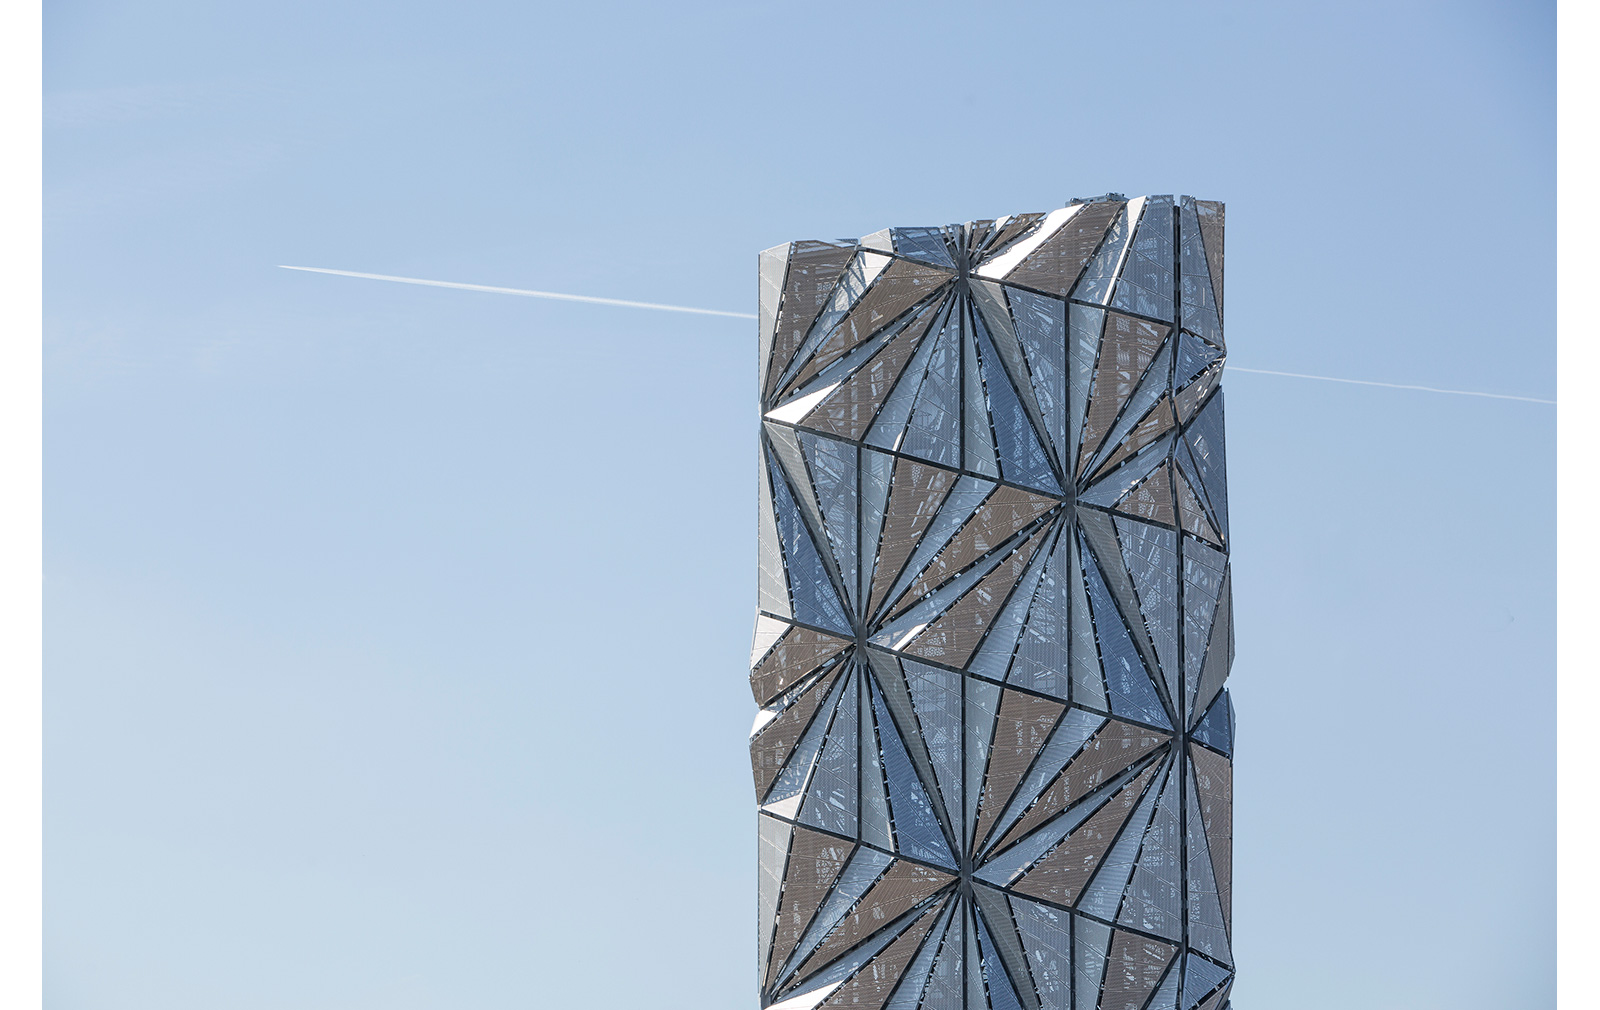 The Optic Cloak by Conrad Shawcross. Photography: Marc Wilmot, courtesy of the Greenwich Peninsula